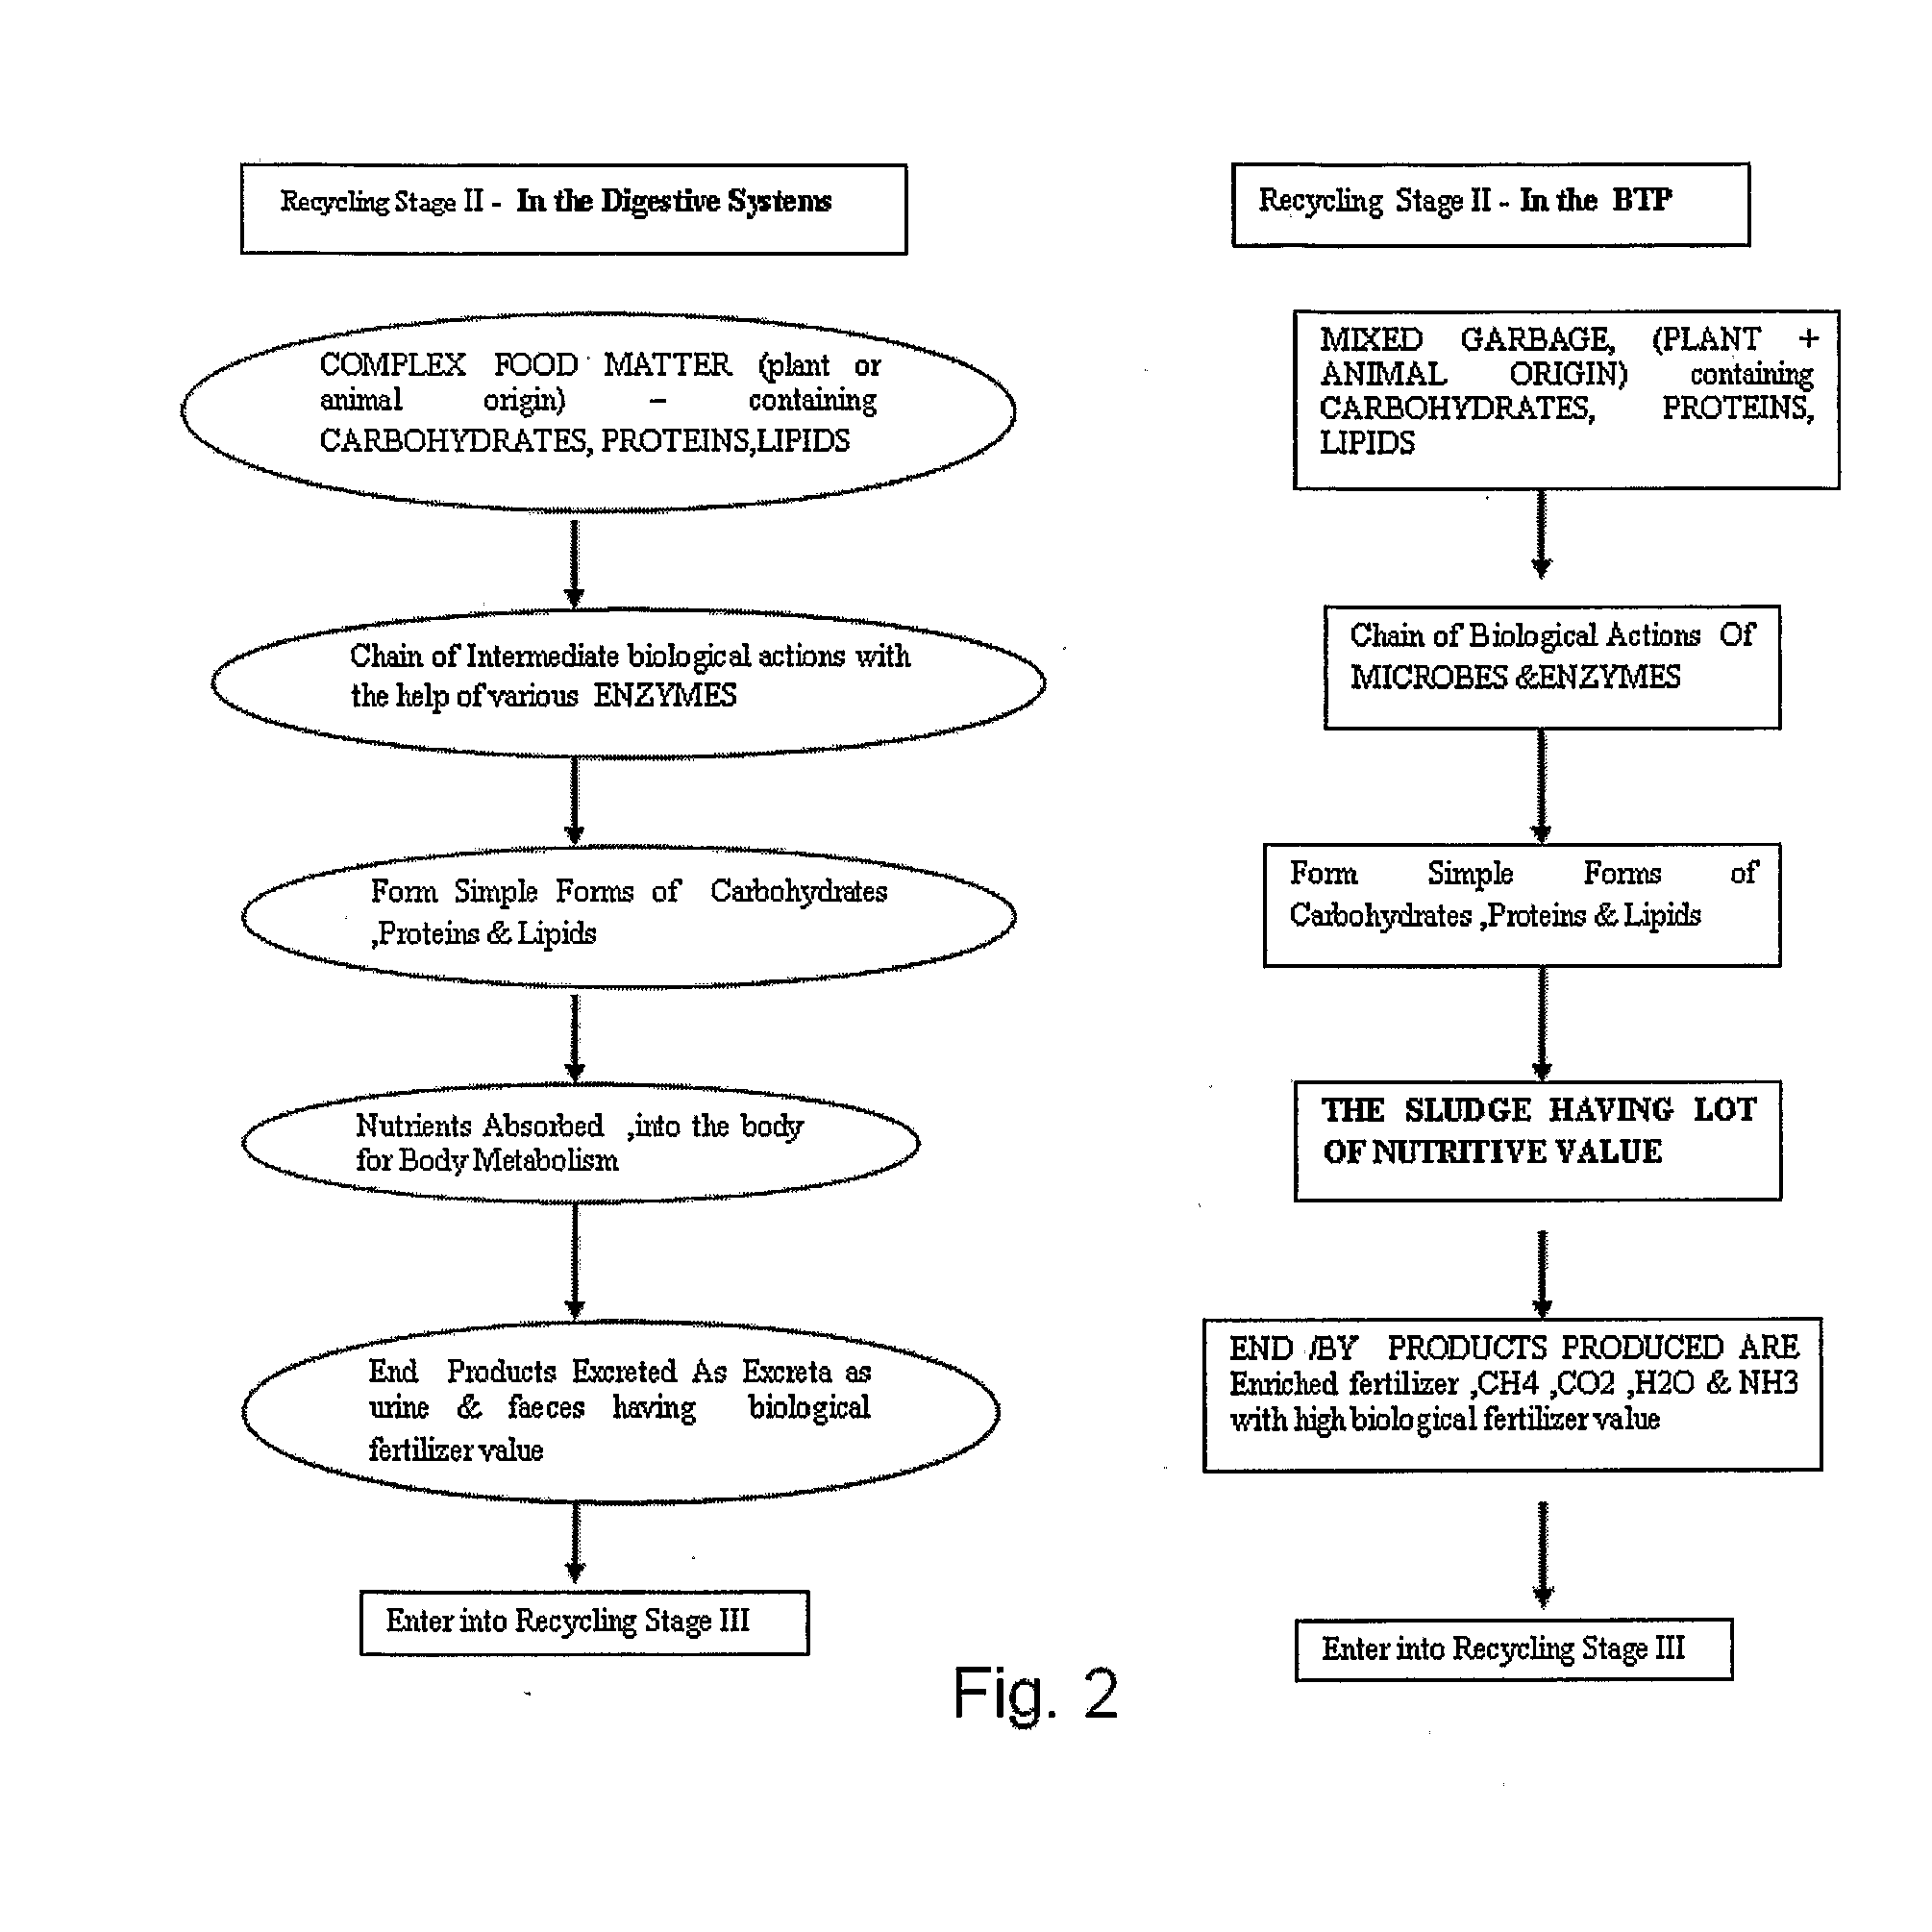 System and method for biological treatment of biodegradable waste including biodegradable3 municipal solid waste